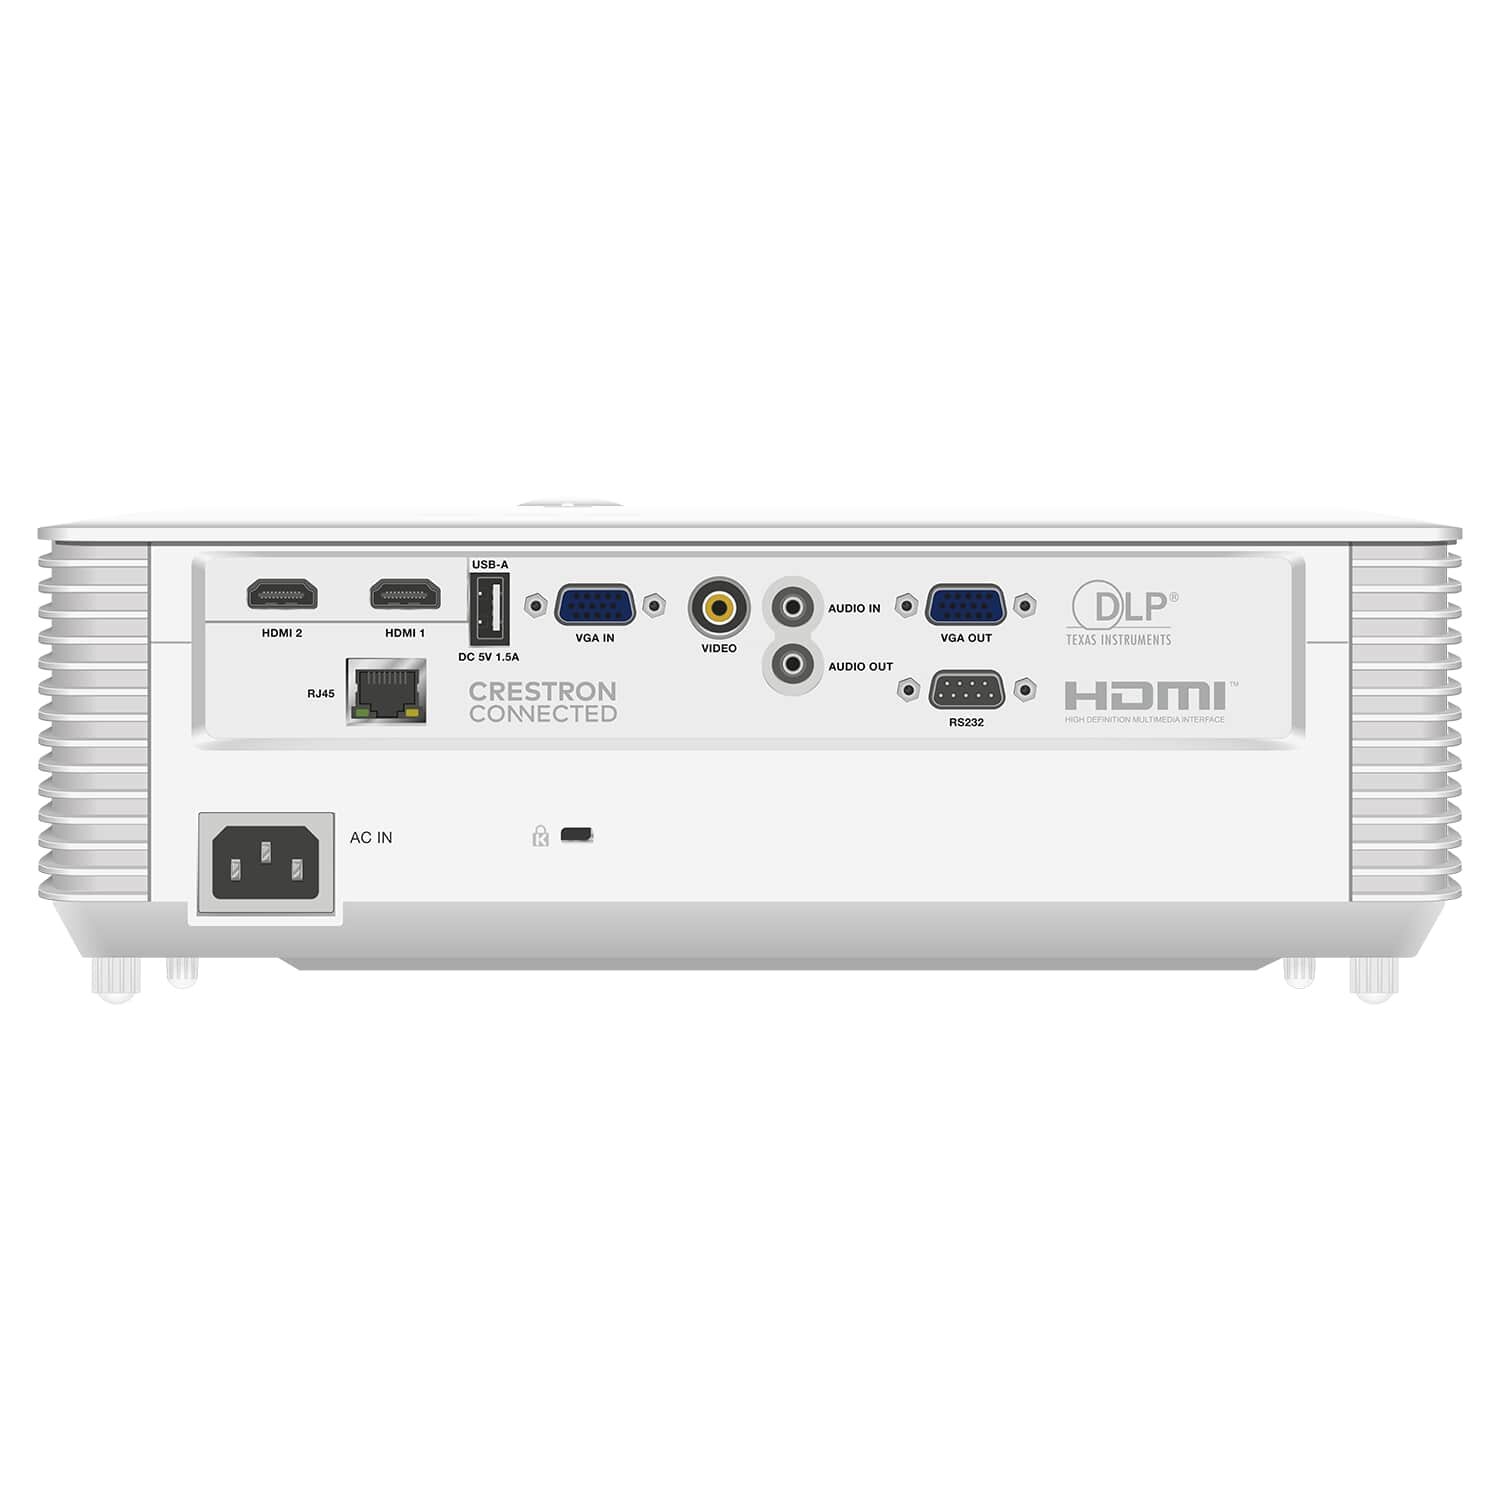 Проектор InFocus DLP, XGA, 4600 lm, 30 000:1, 1.48-1.93:1, 2xHDMI 1.4, VGA in/out, Composite Video, 3.5mm in/out, USB-A, RS-232, RJ-45, лампа 1 - фото №10